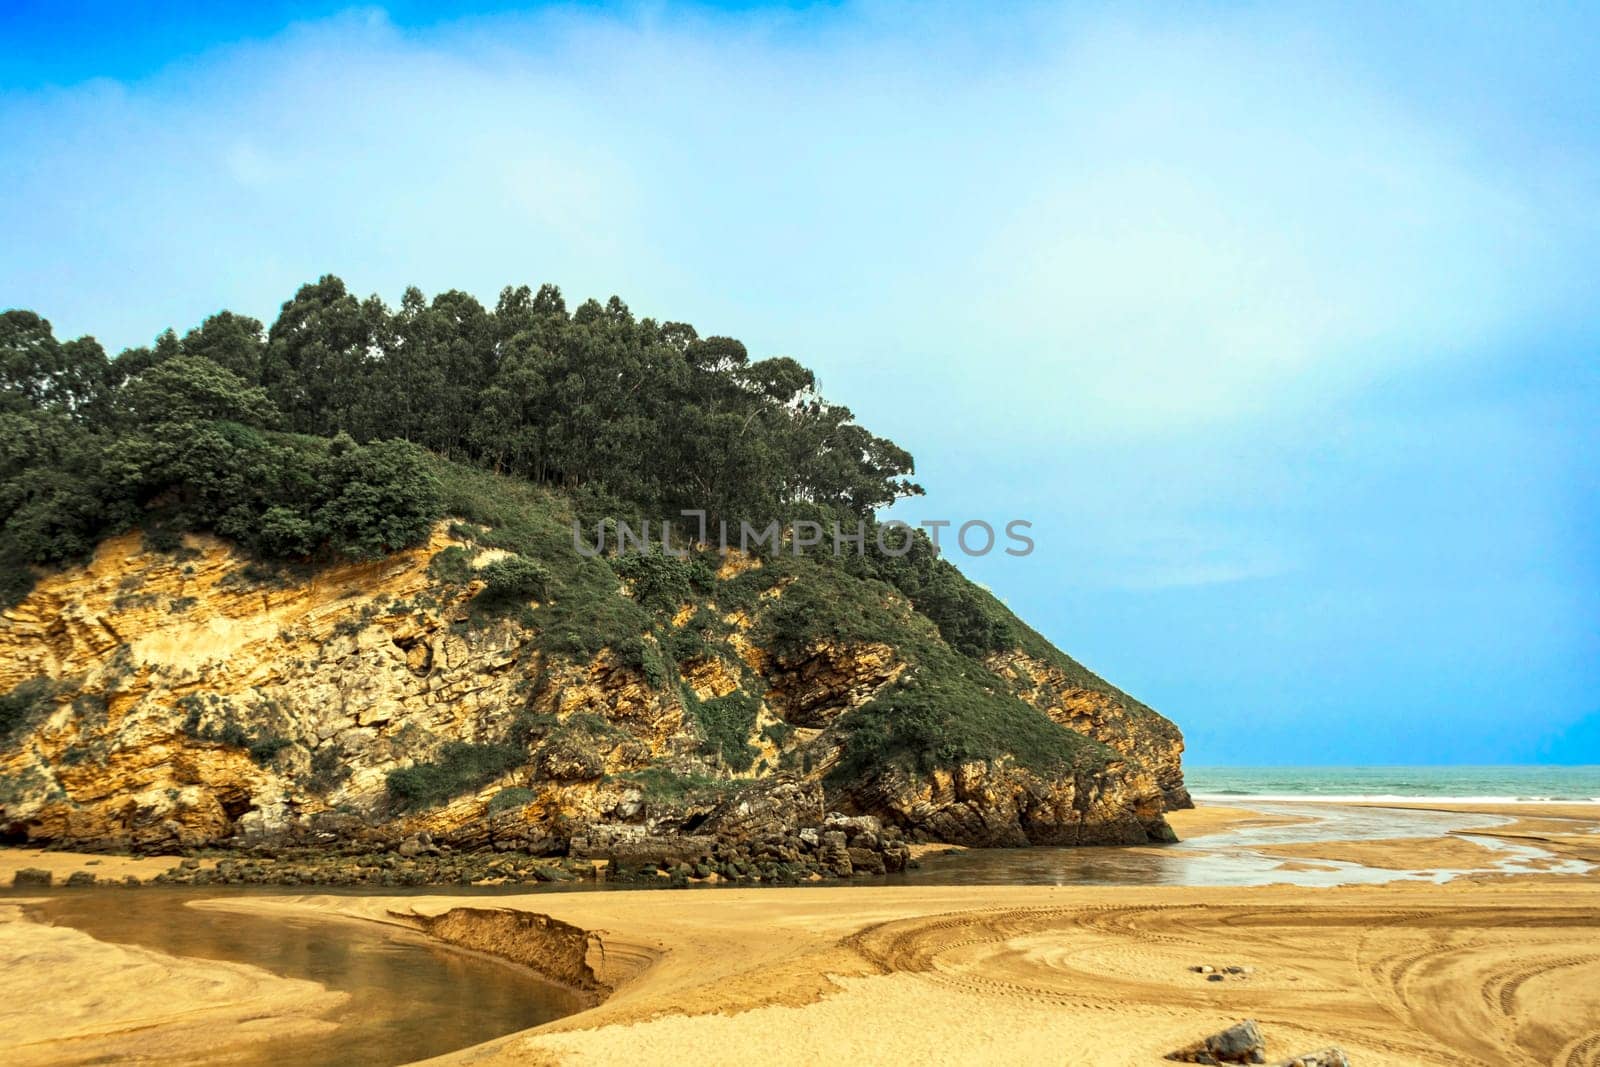 Atlantic coast of Spain rocky hill with trees and green vegetation, Basque Country. Way of Santiago